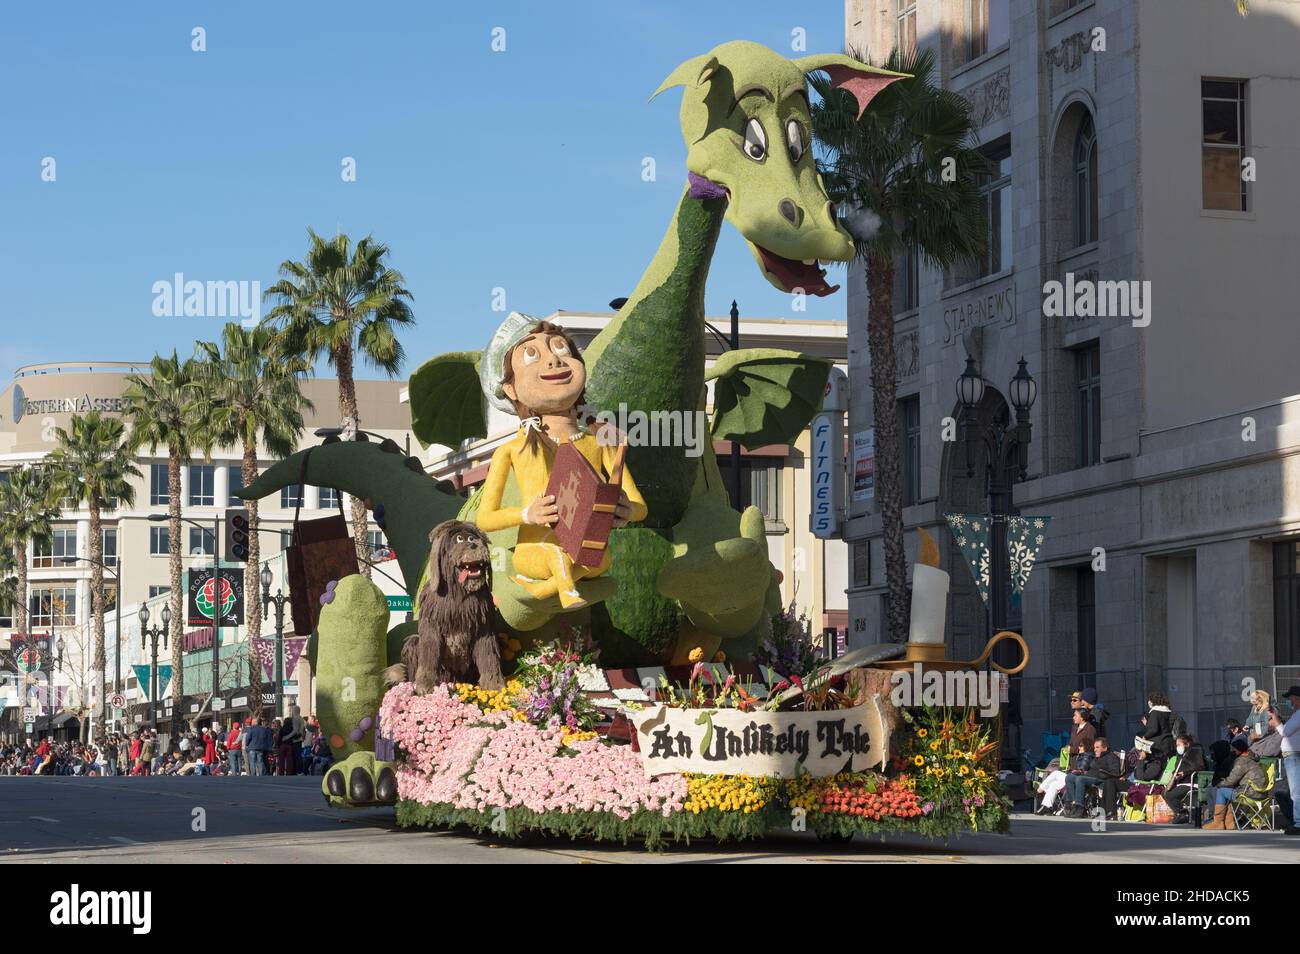 The City of Burbank, An Unlikely Tale, float shown during the 2022 Rose Parade in Pasadena. Stock Photo